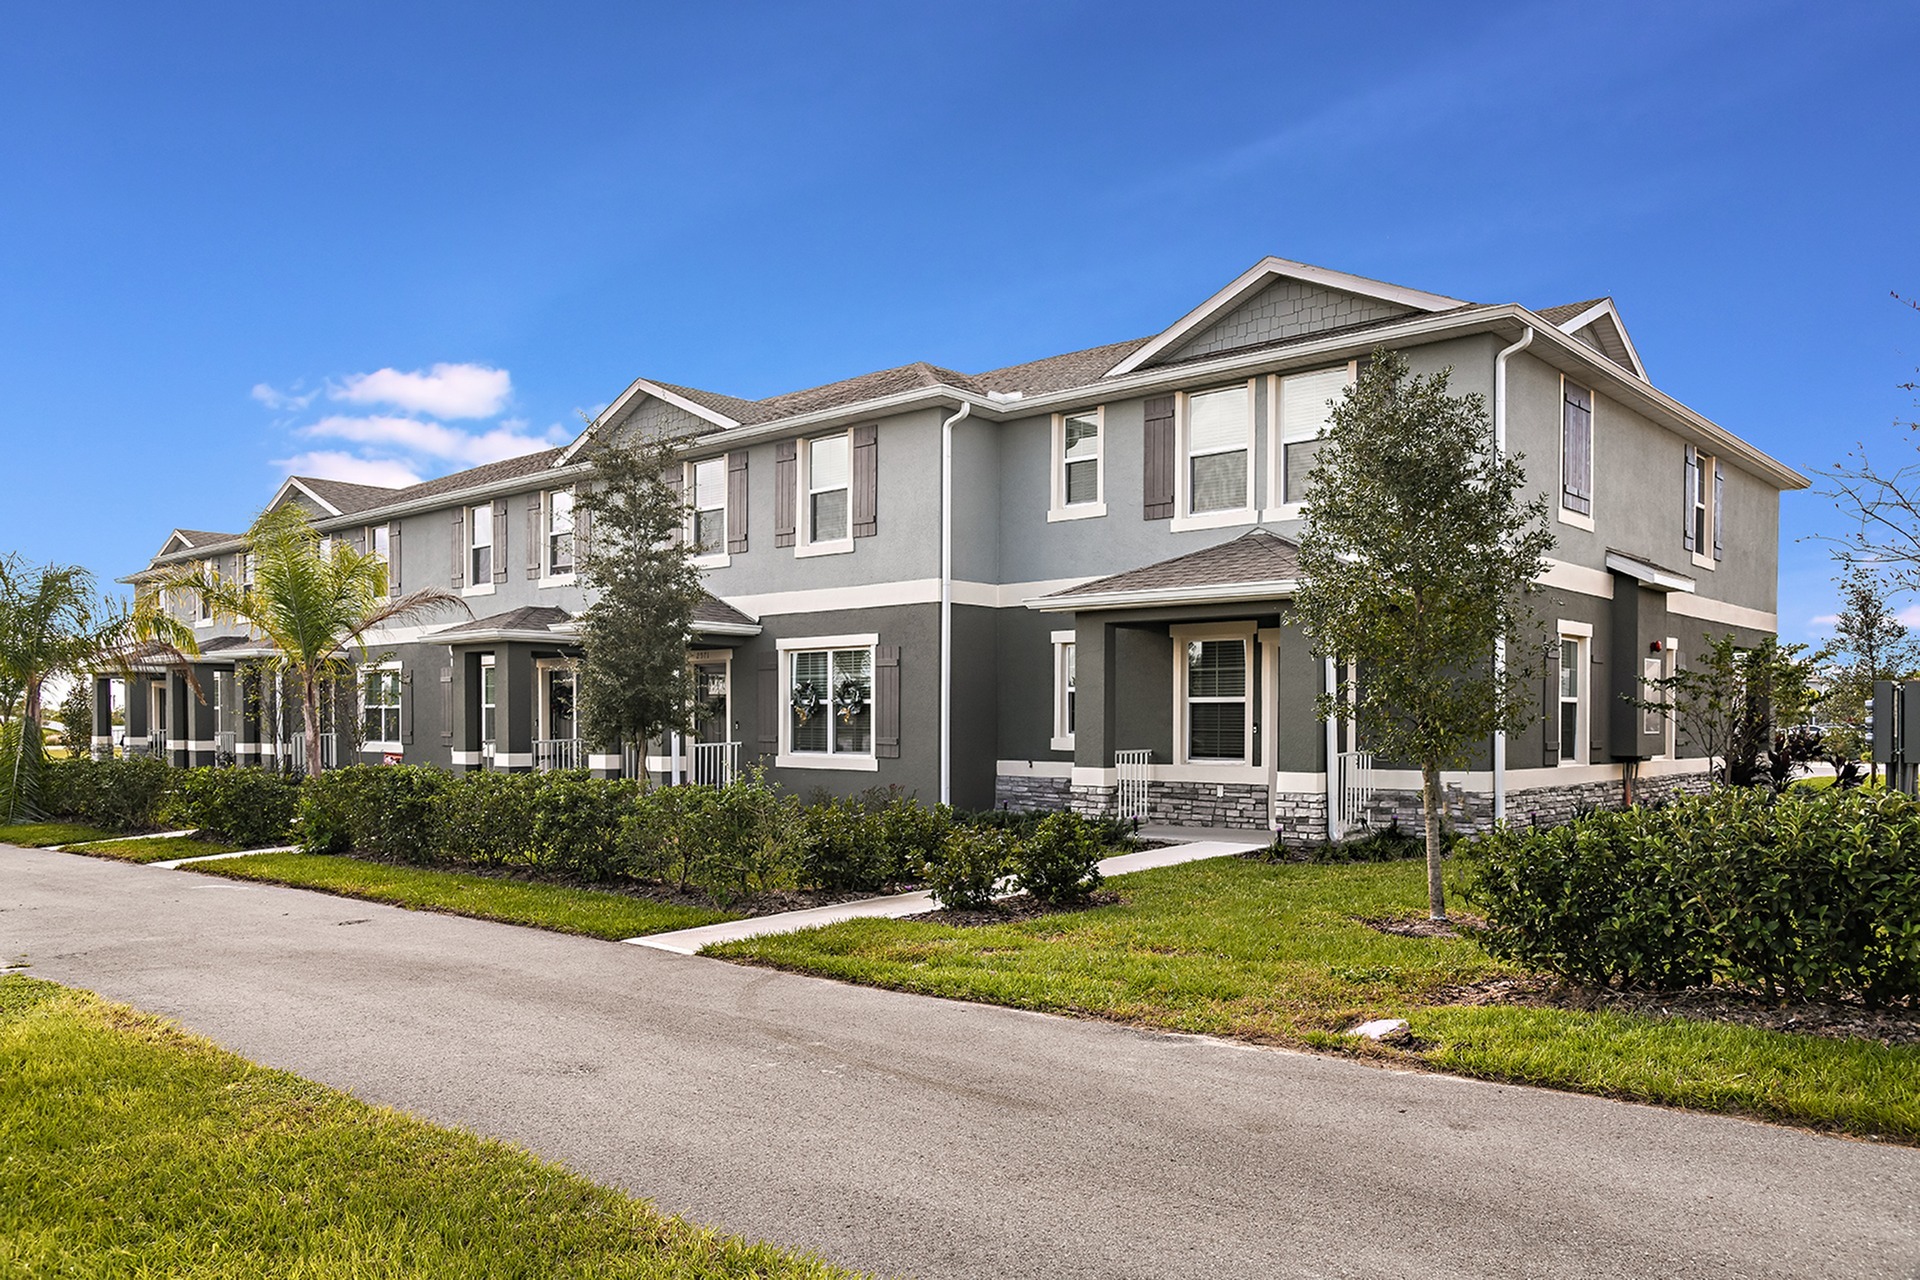 Two story homes at Summerwell Avian Pointe in Apopka, FL, featuring a grey exterior and grassy lawn.